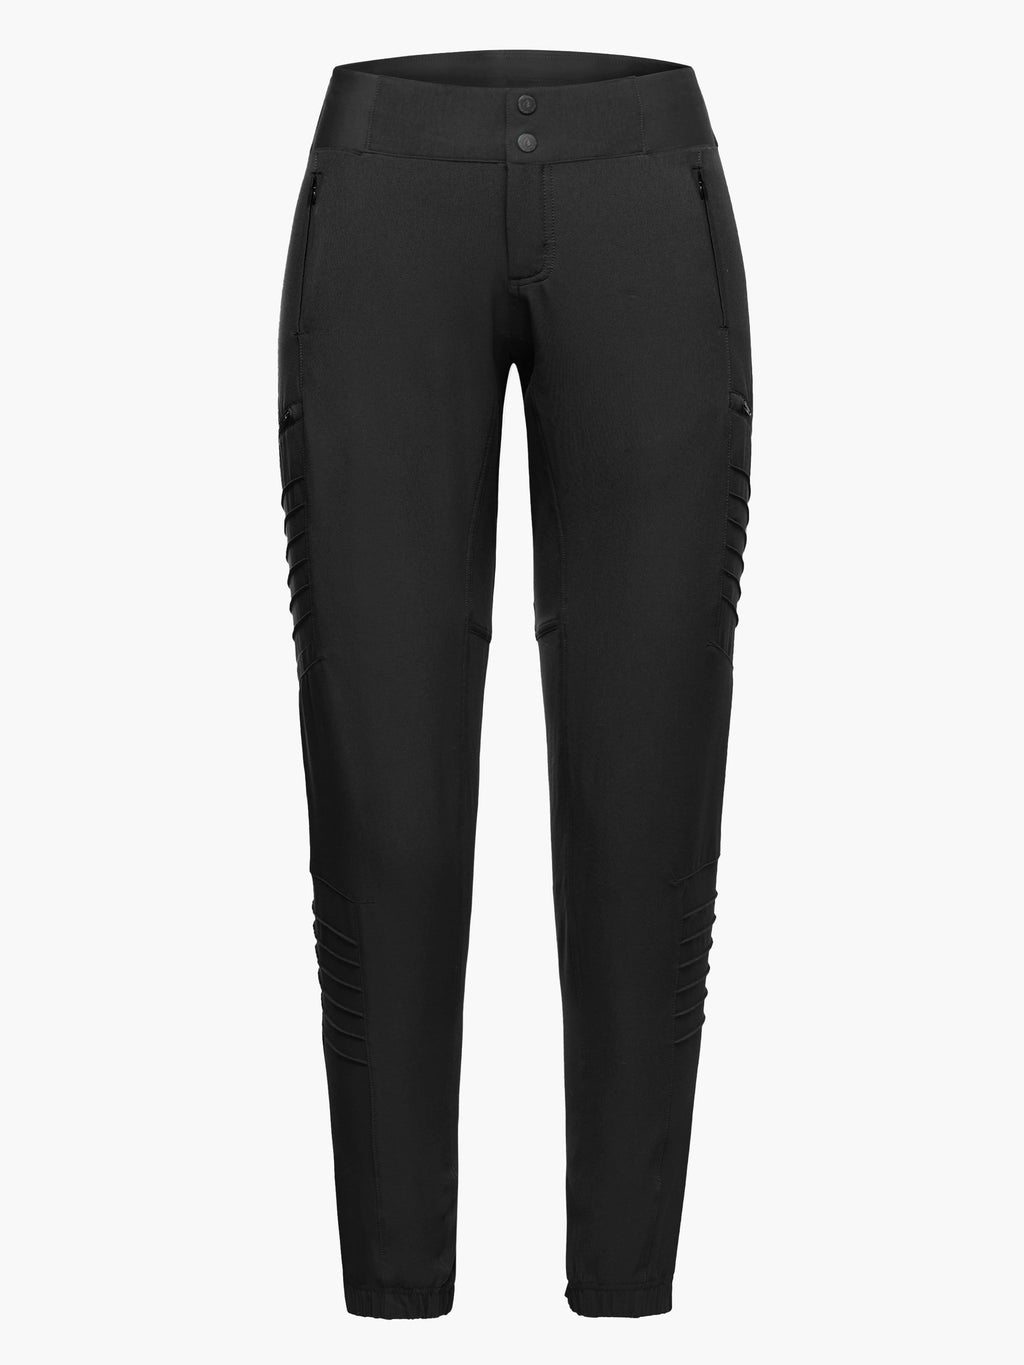 SHREDLY - All Time - Zipper Snap Mid-Rise Pant : Noir - image